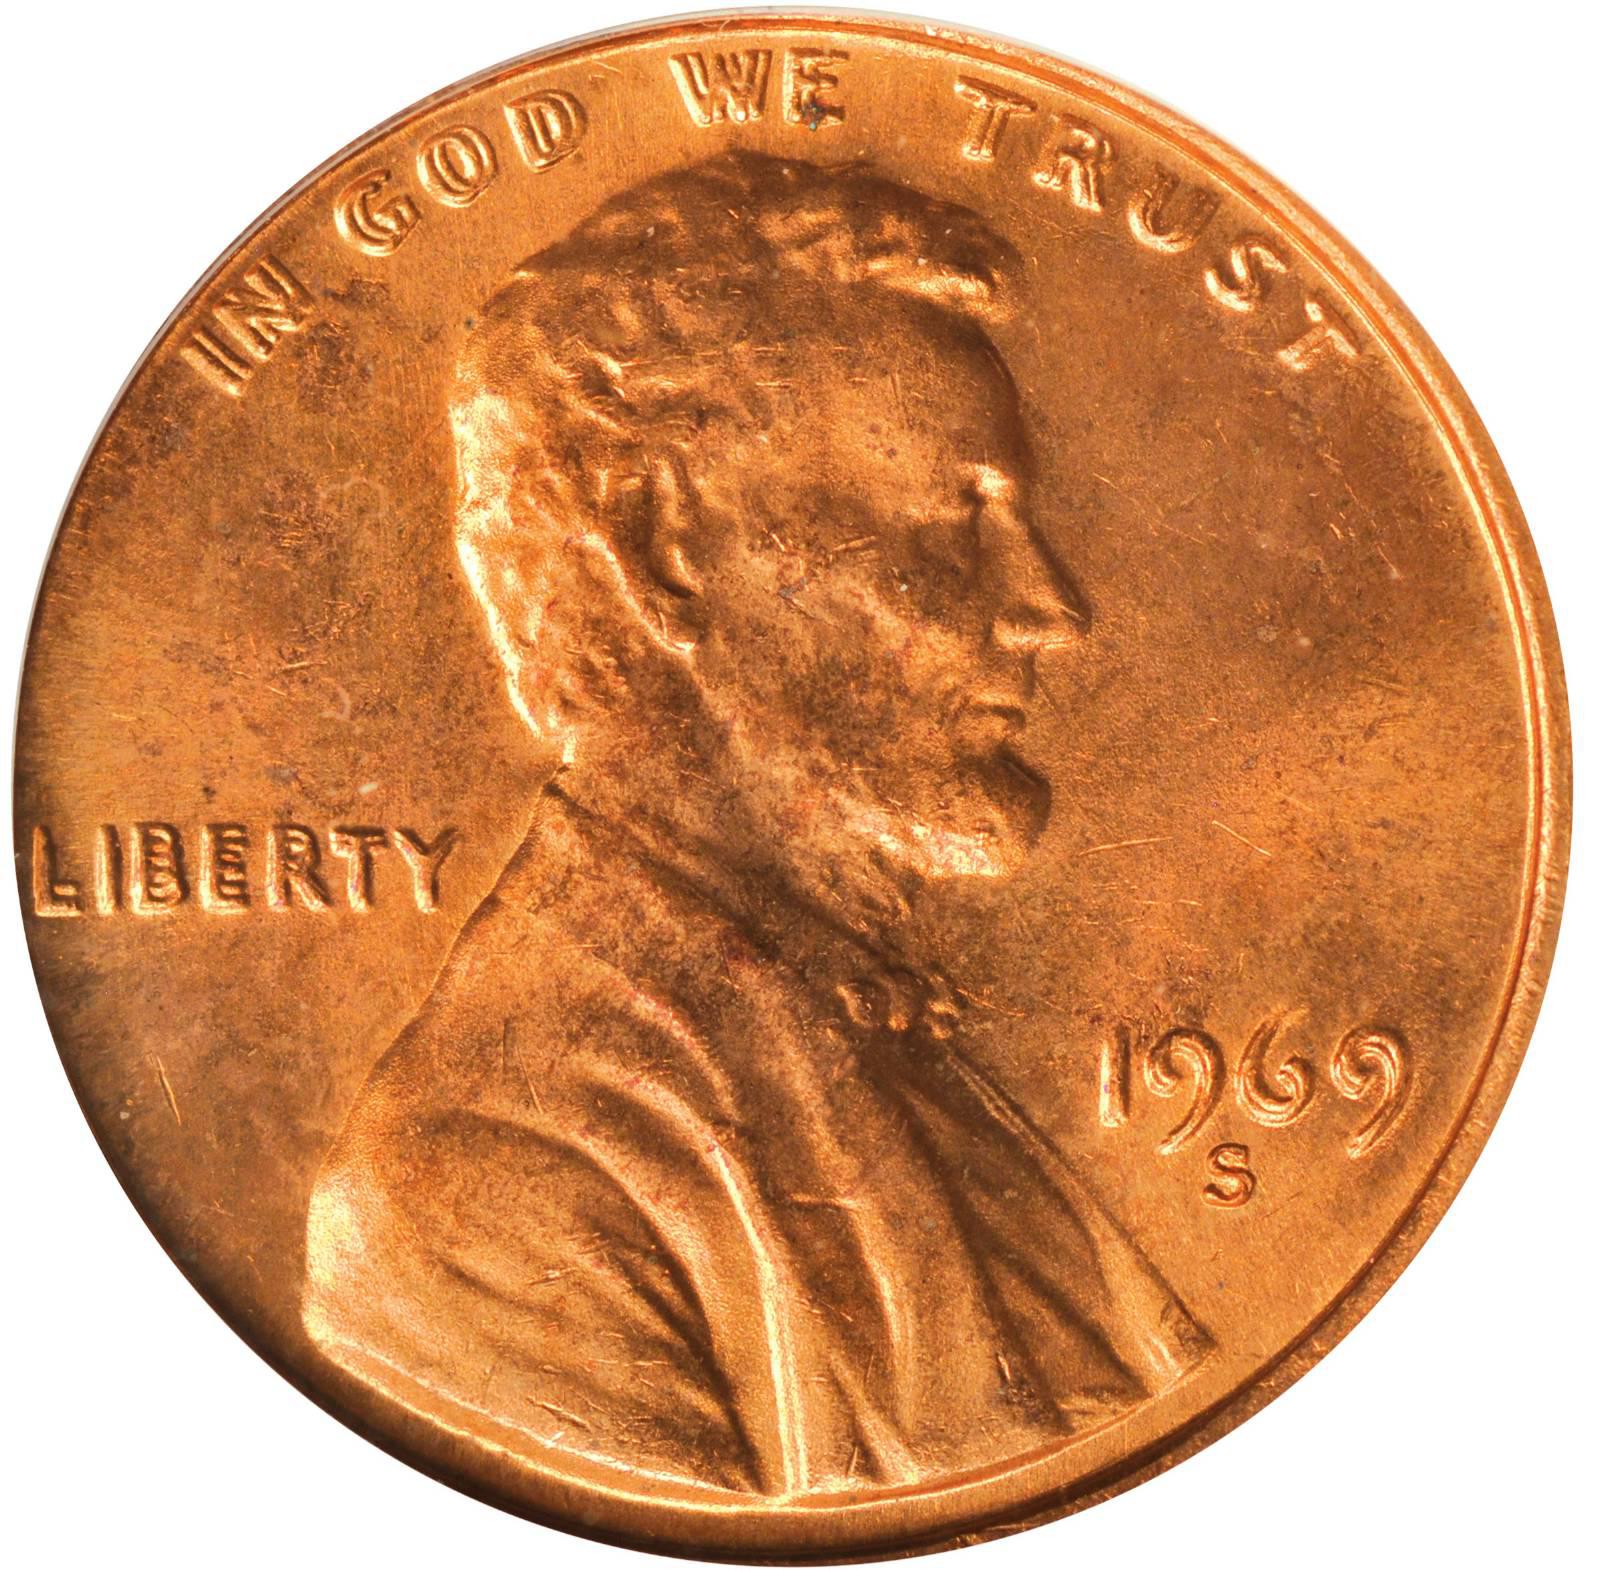 Rare 1969 D penny Lincoln coin sells for more than $2,000 - and